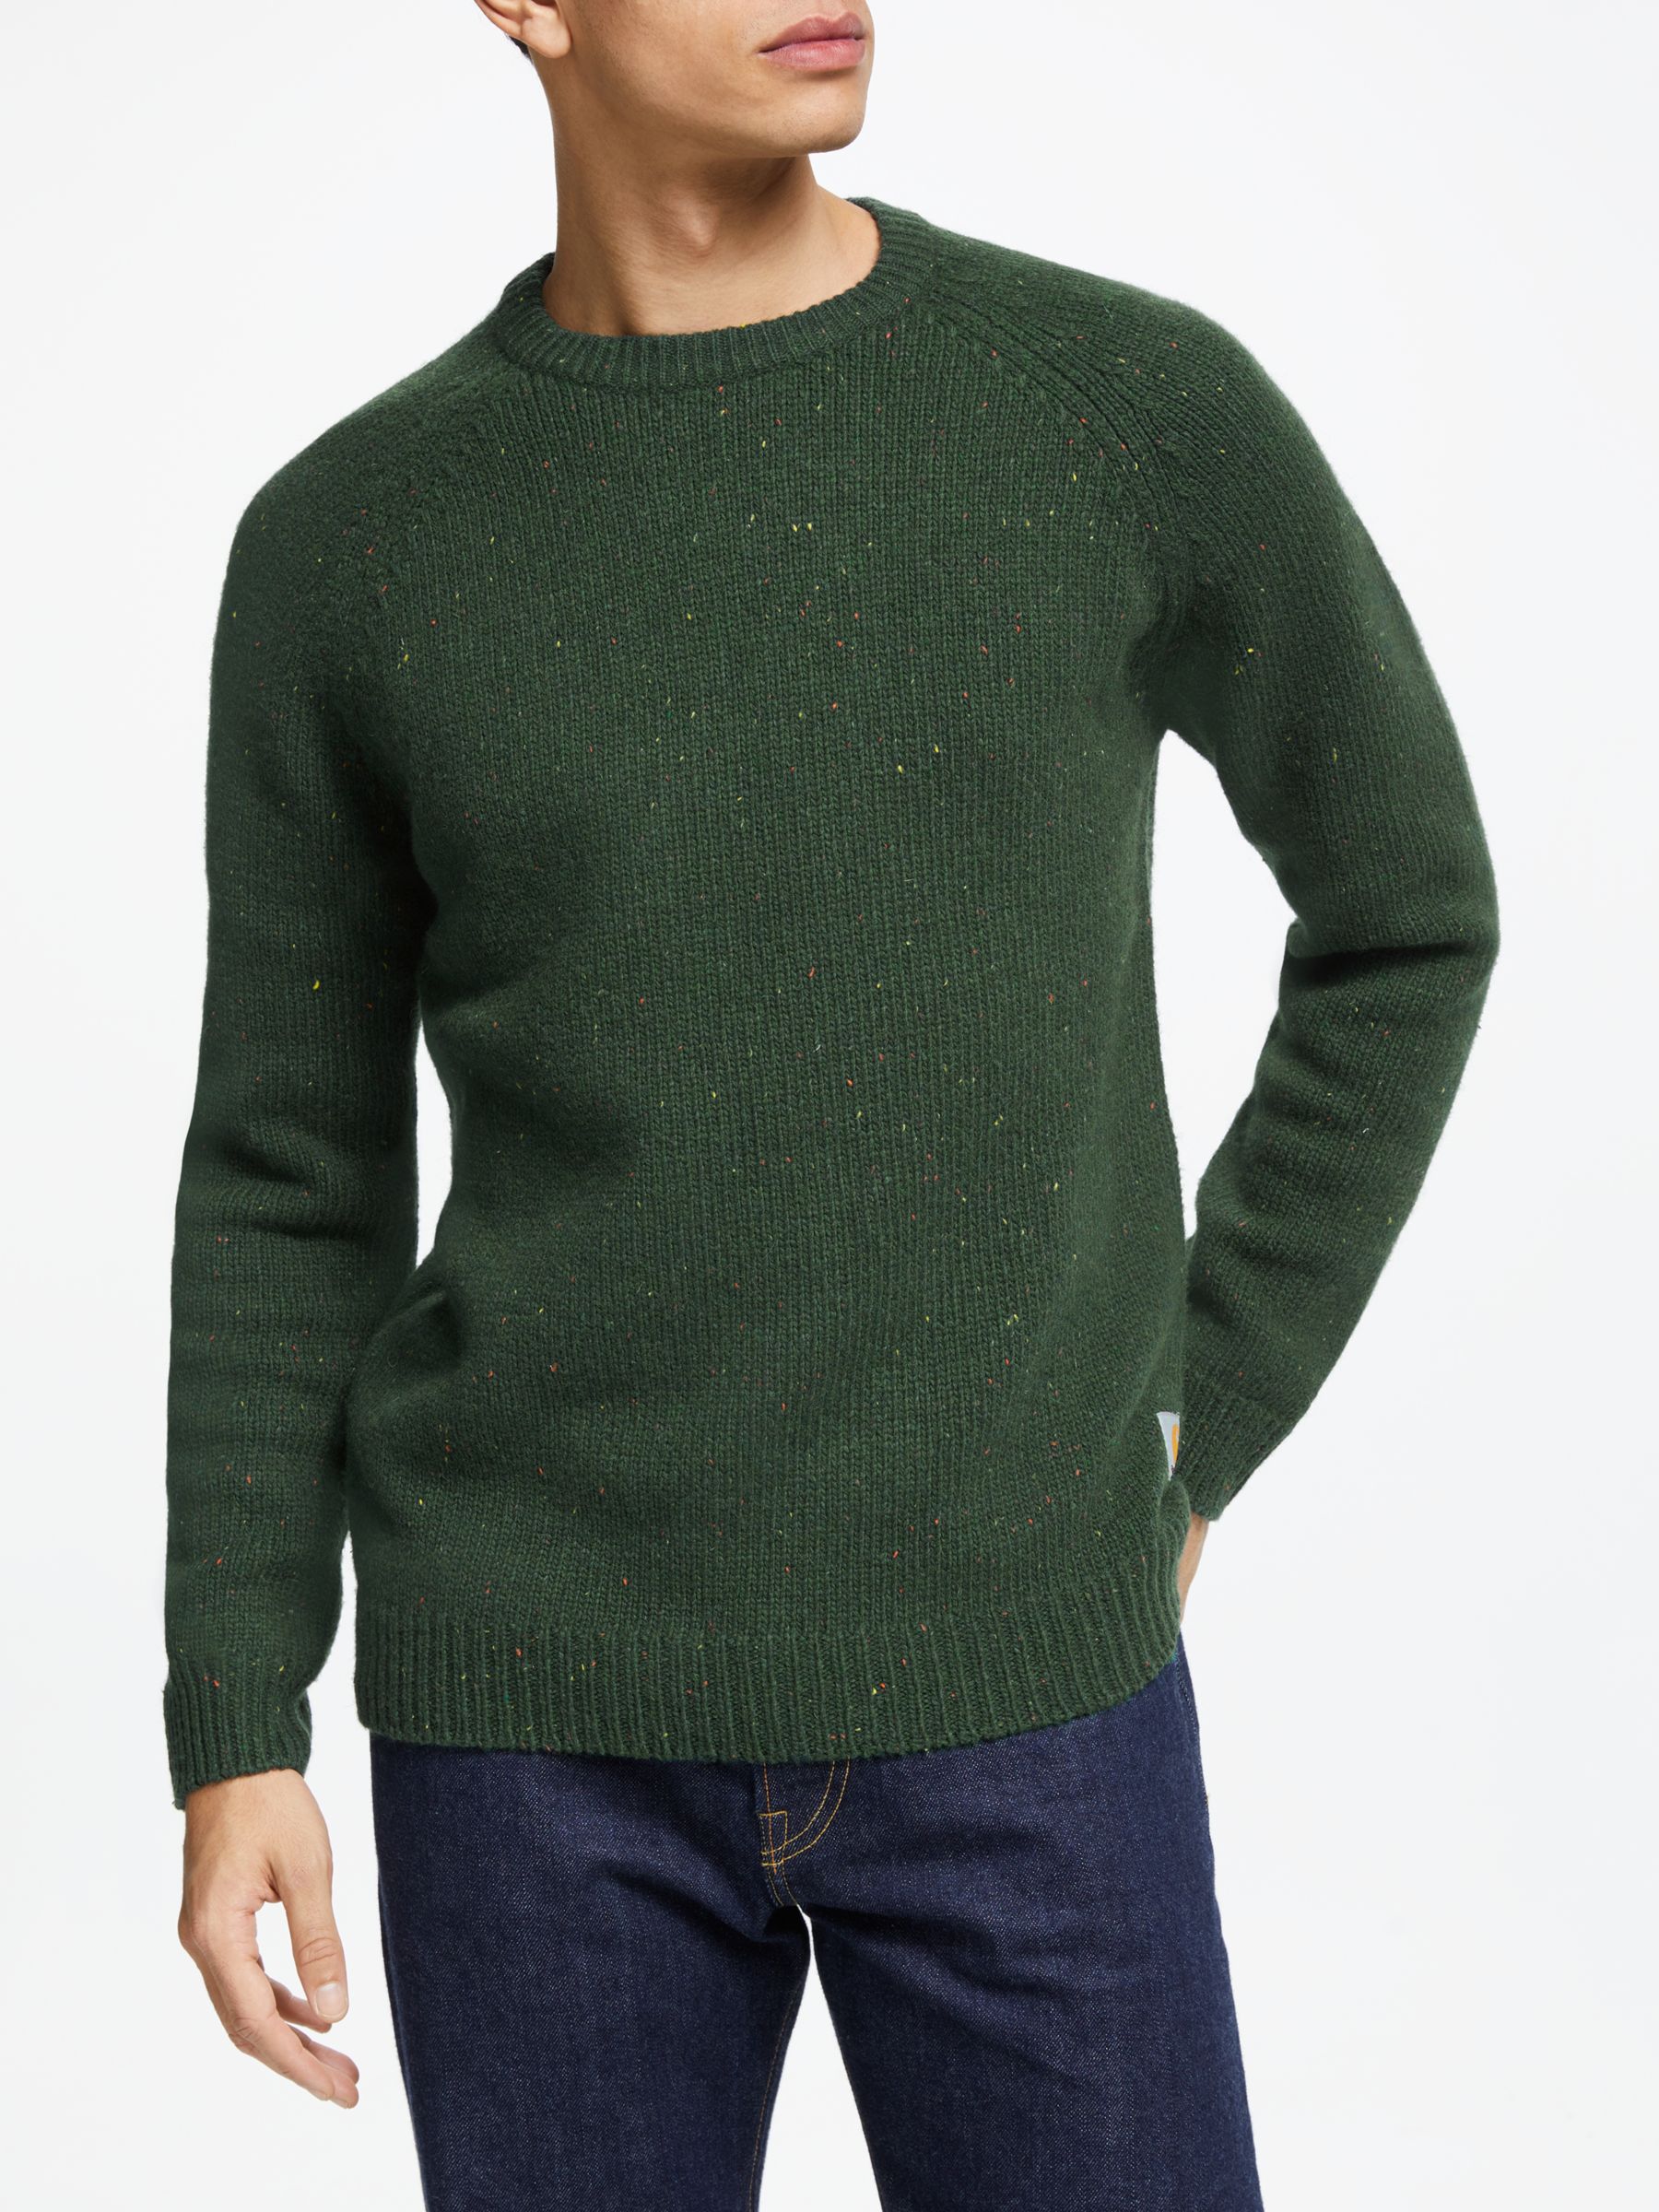 Carhartt WIP Anglistic Flecked Crew Neck Knit Jumper, Loden Heather